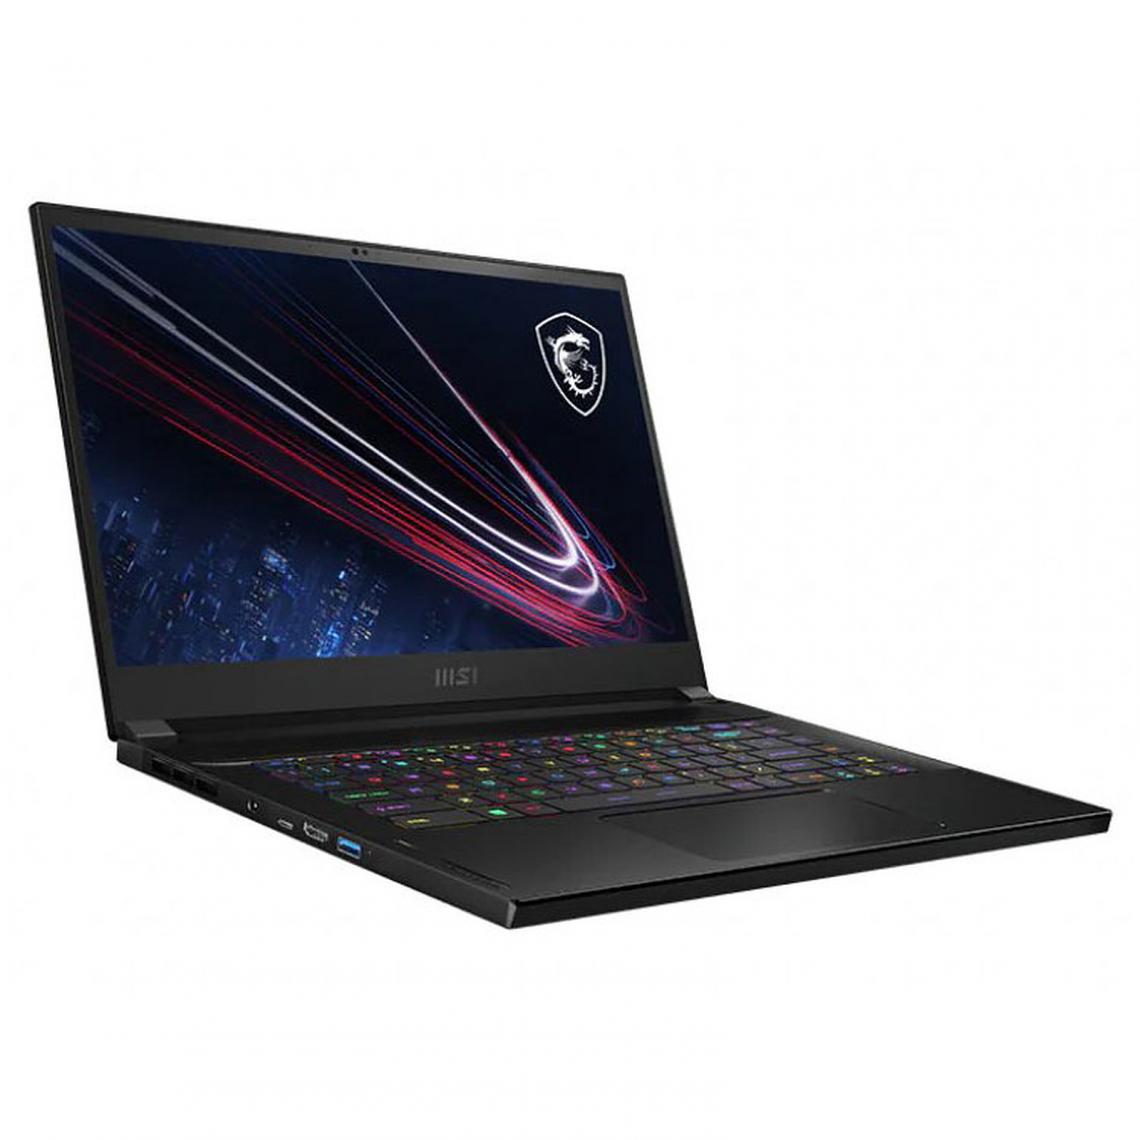 Msi - MSI Stealth GS66 12UGS-040FR - Core i7 12700H / 2.3 GHz - Win 11 Pro - GF RTX 3070 Ti - 32 Go RAM - 1 To SSD NVMe - 15.6' 2560 x 1440 (QHD) @ 240 Hz - Wi-Fi 6E - noir profond - PC Portable Gamer